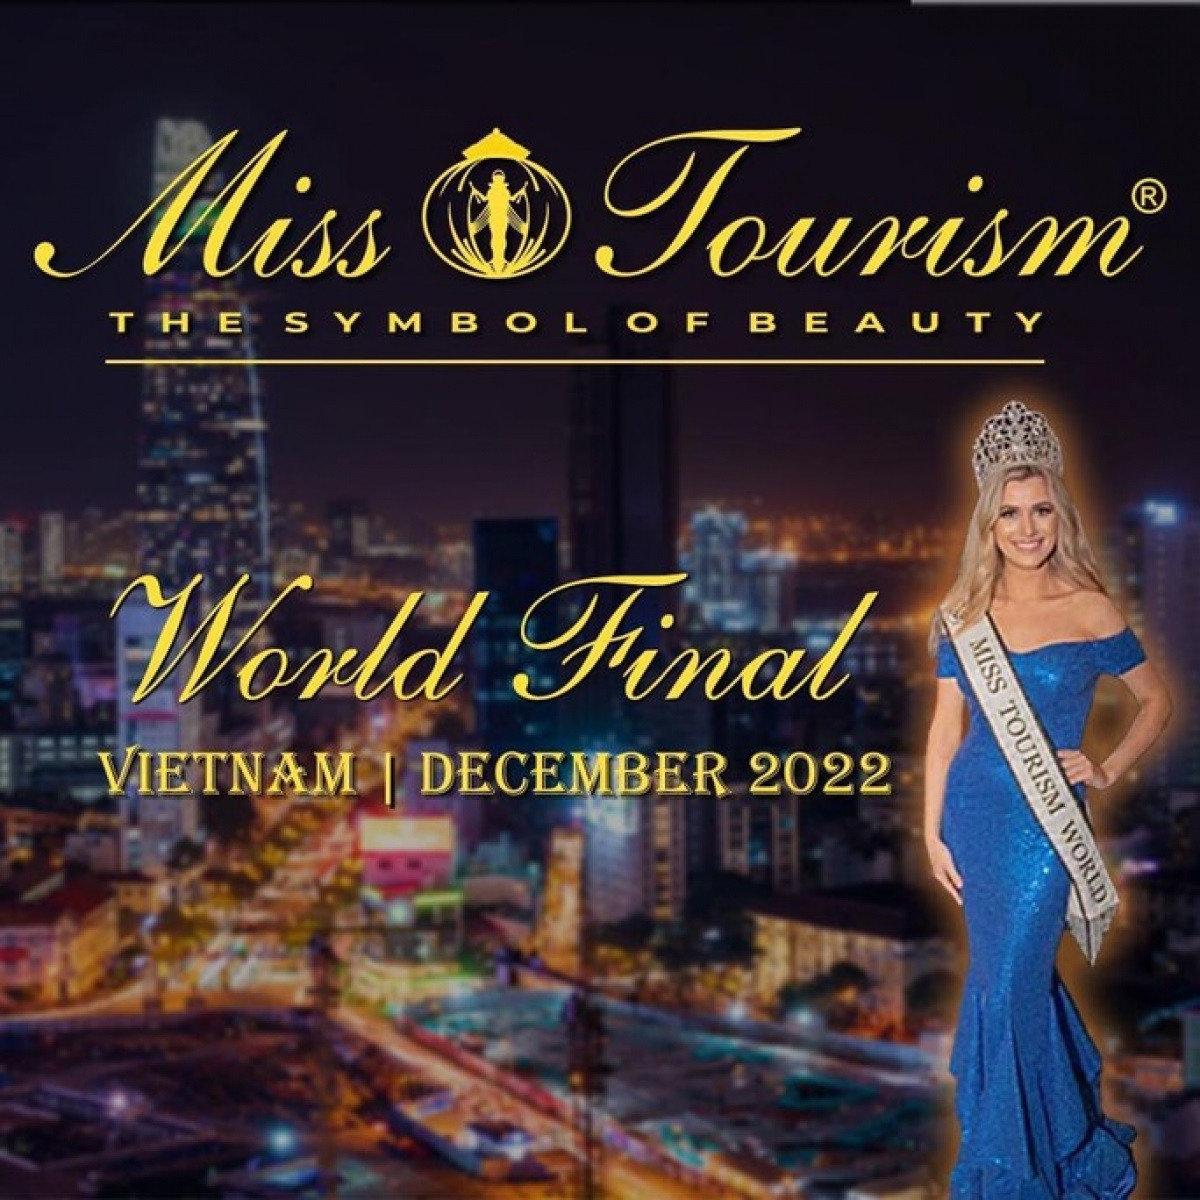 Vietnam named as host Miss Tourism World for first time